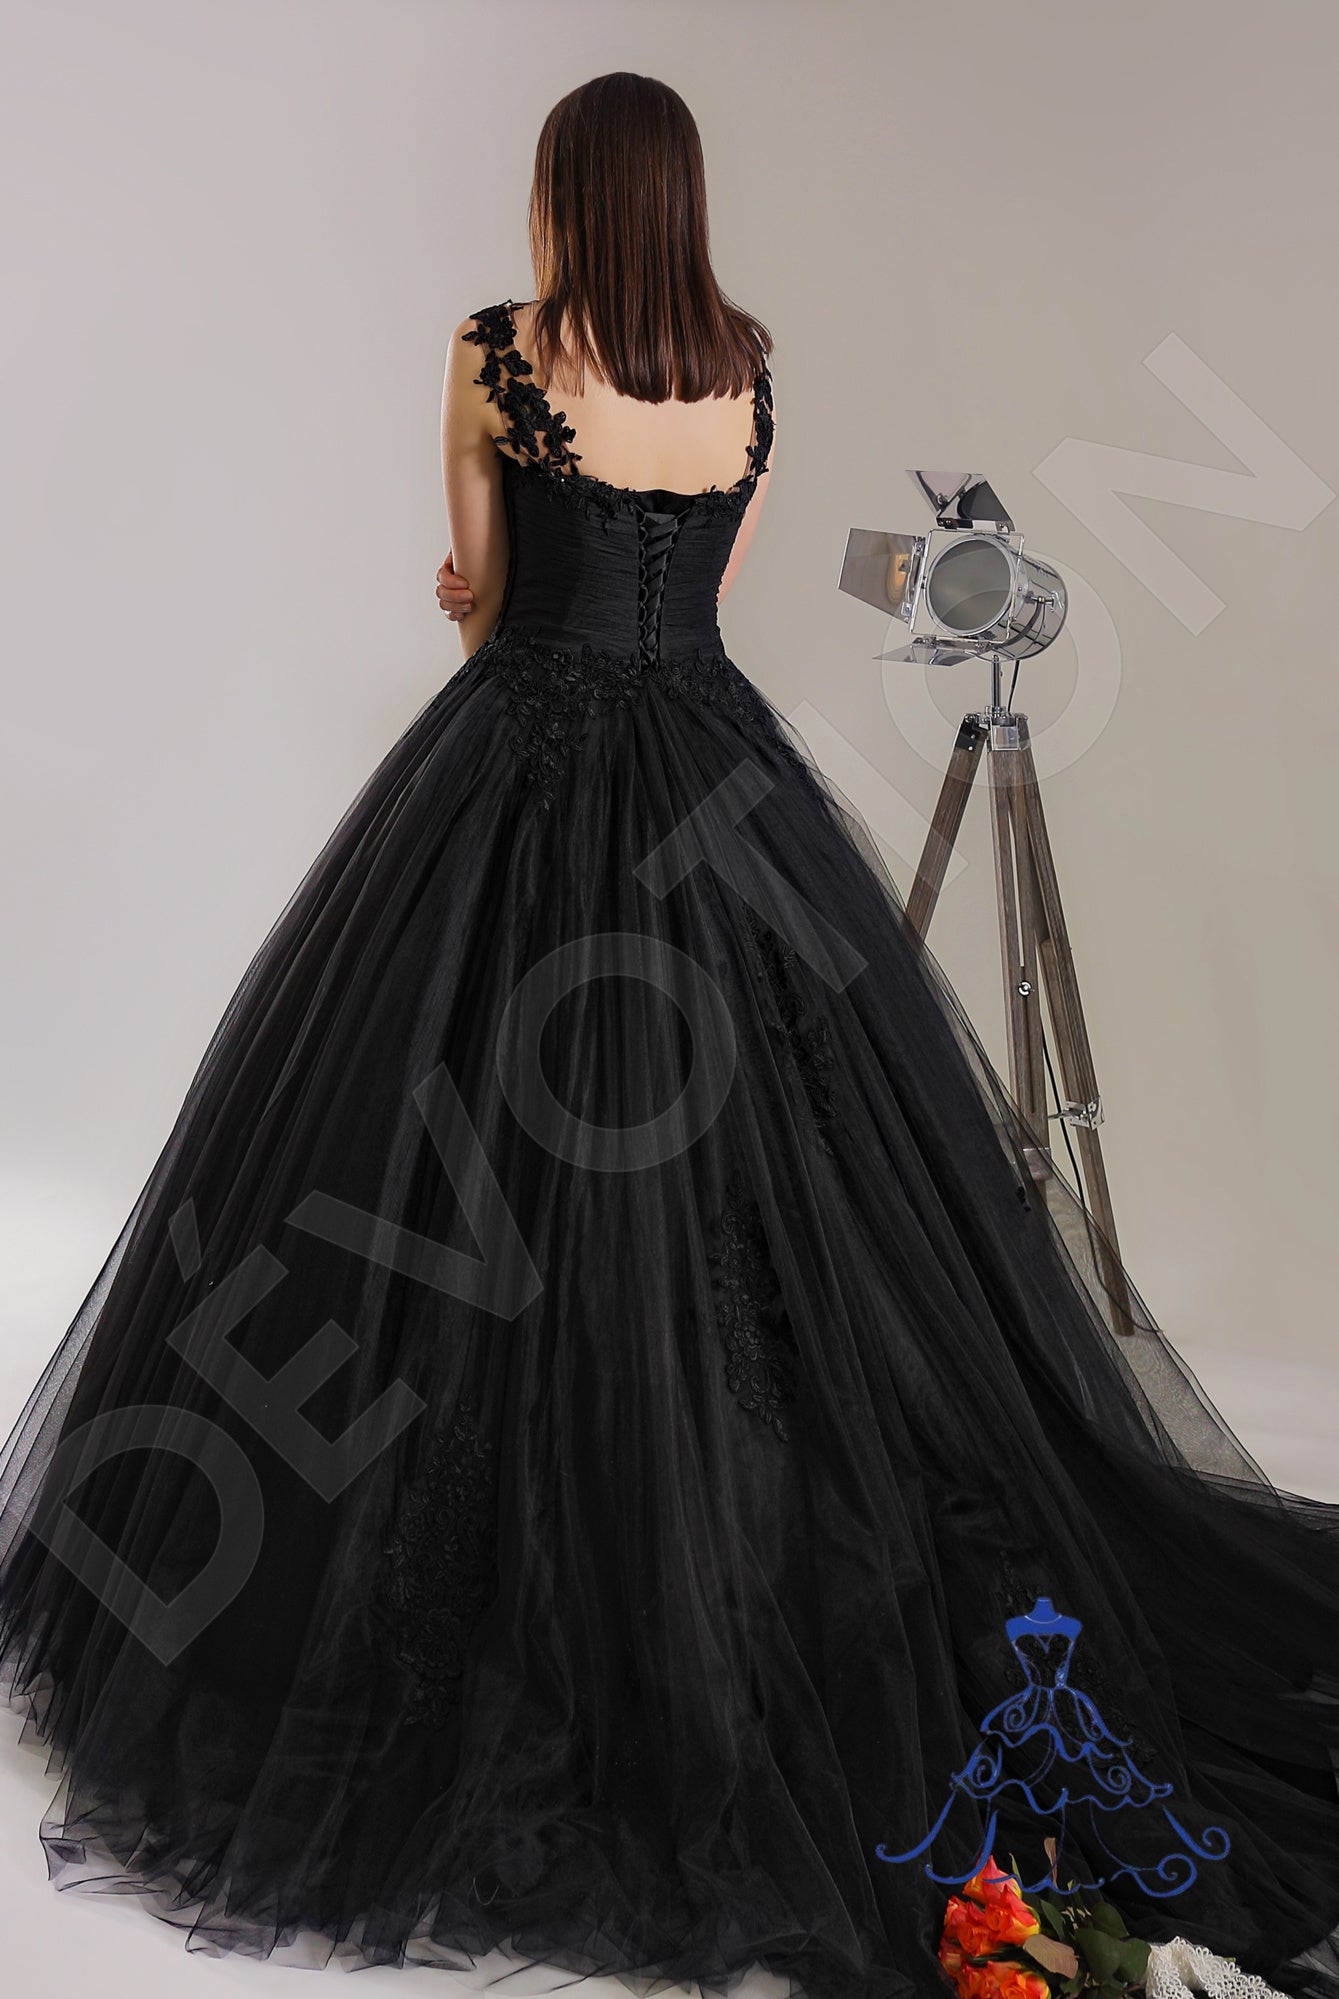 Princess Black Sleeveless Prom Dress Ball Gown Formal Gown With Lace  Appliques · dresschic · Online Store Powered by Storenvy